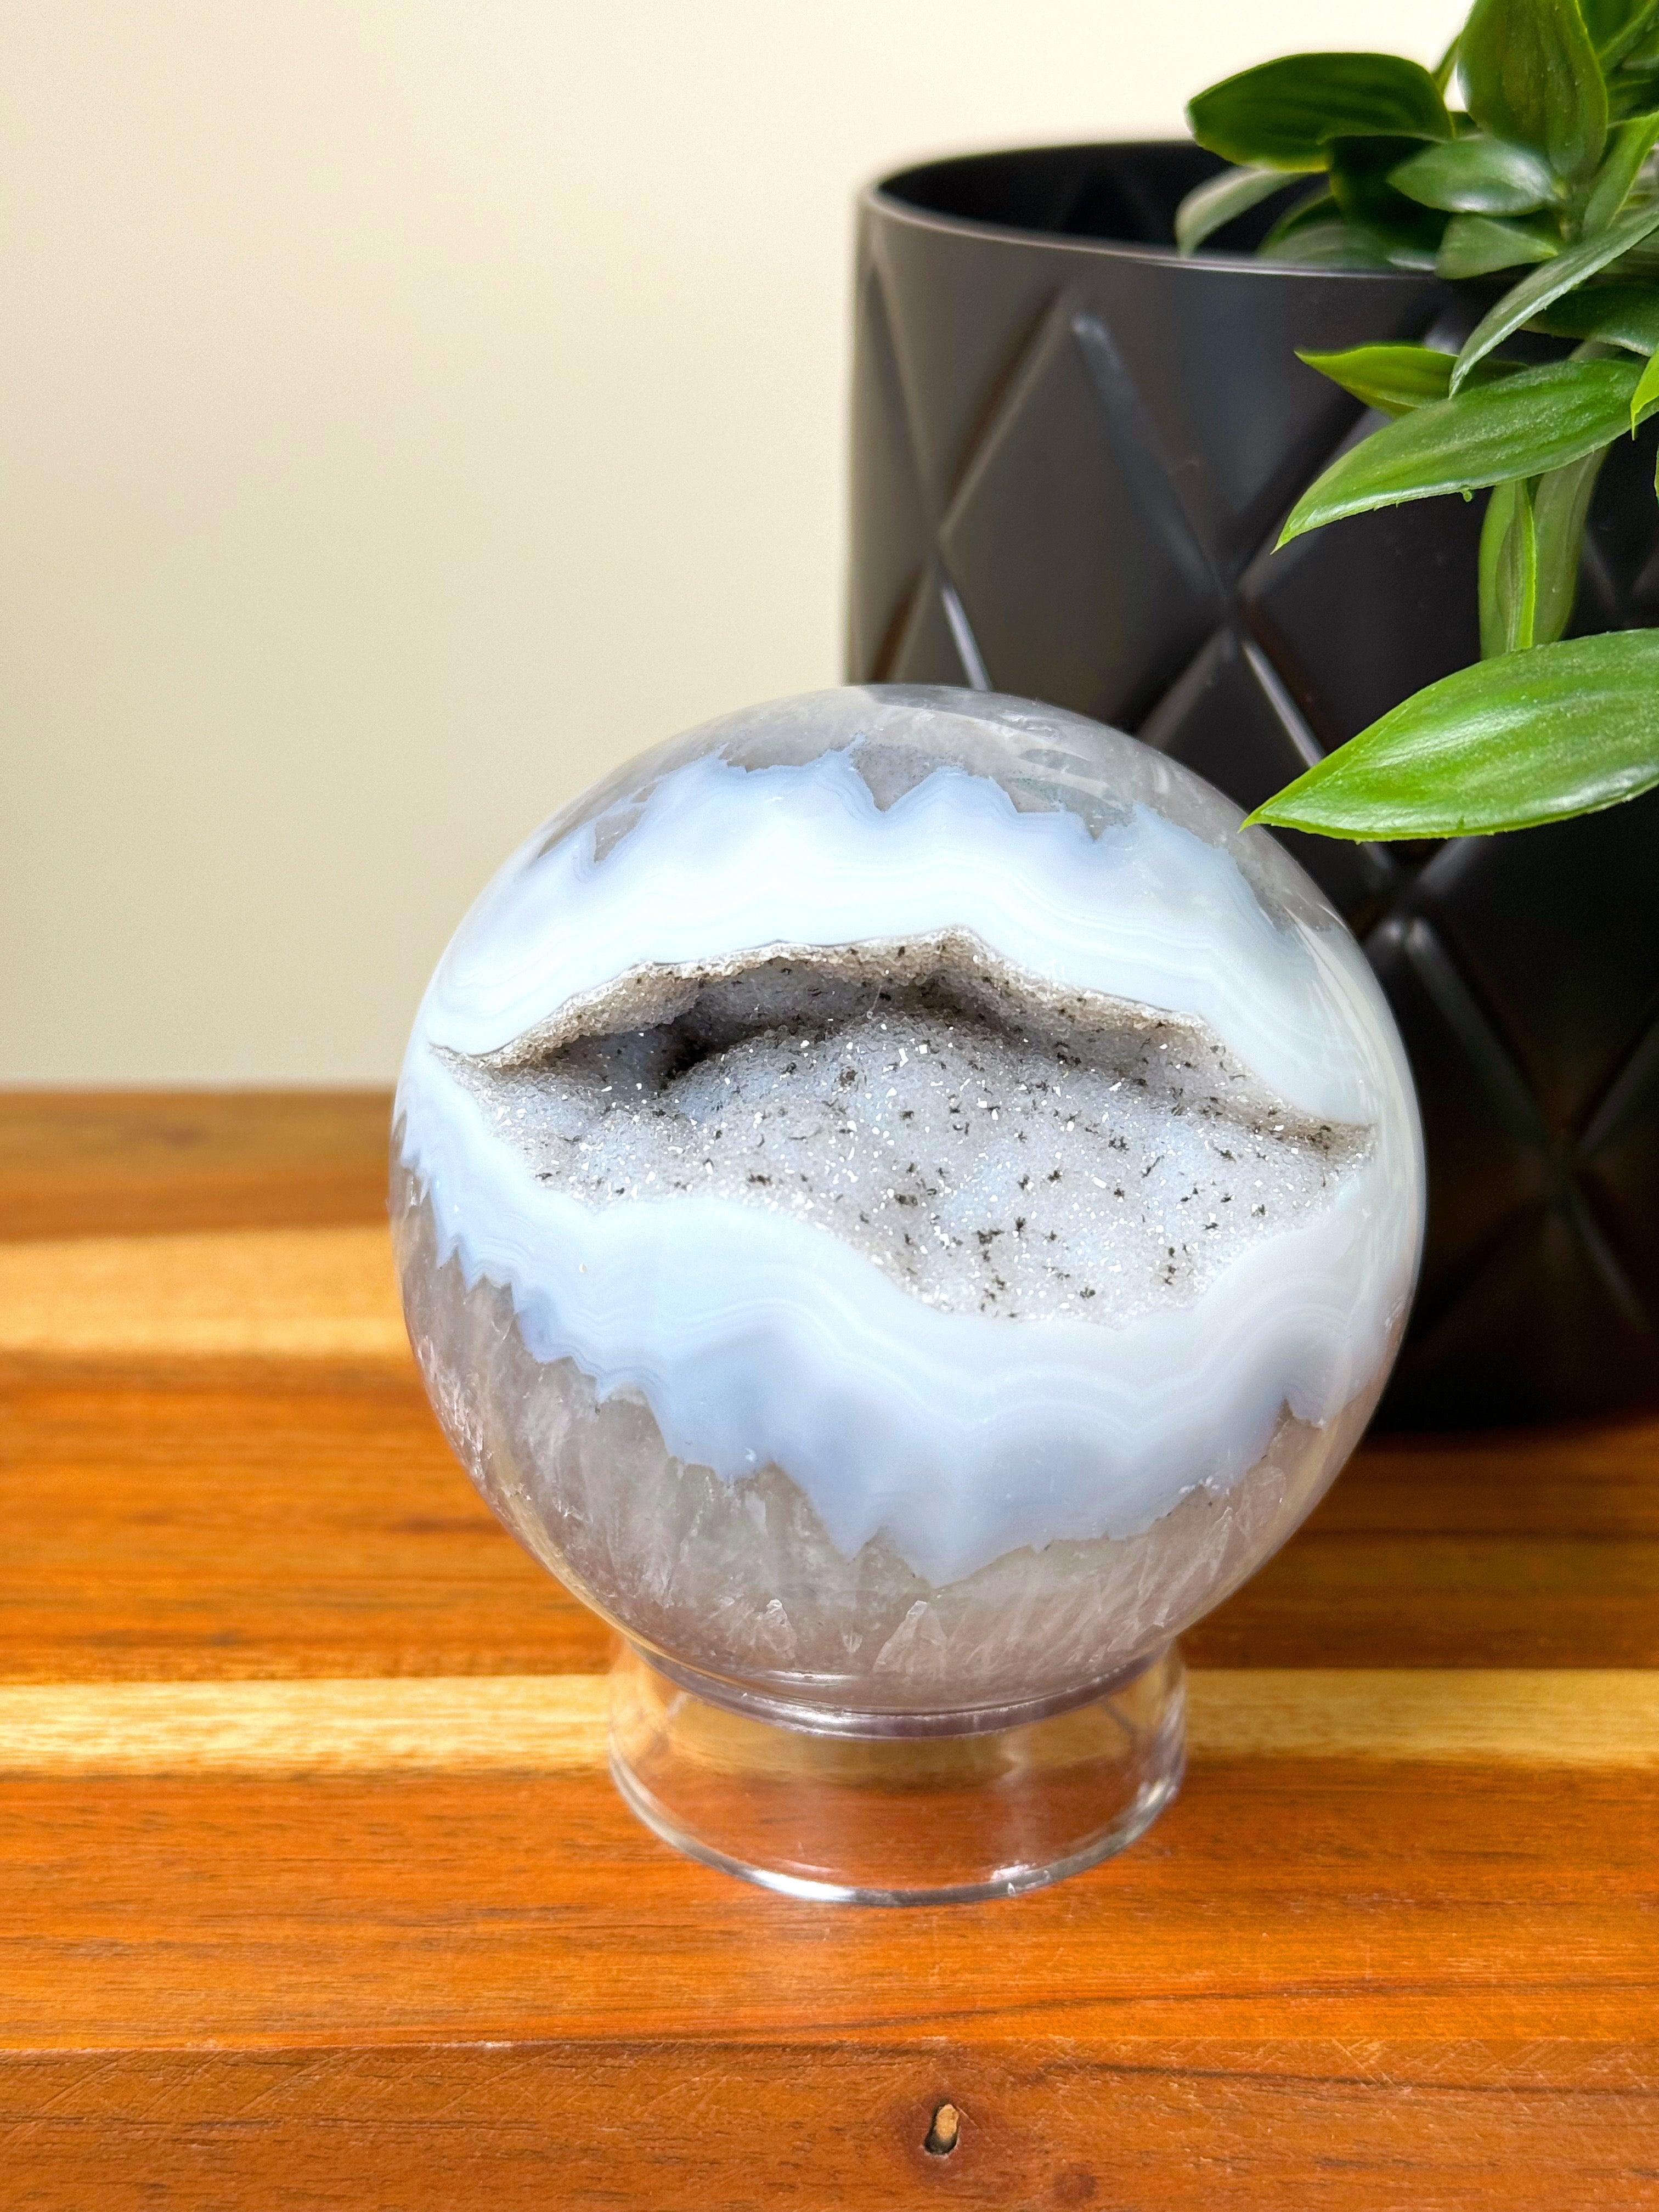 DRUZY AGATE SPHERE 5 - agate, druzy agate, googly agate, googly eye, googly eye agate, one of a kind, sphere, statement piece - The Mineral Maven